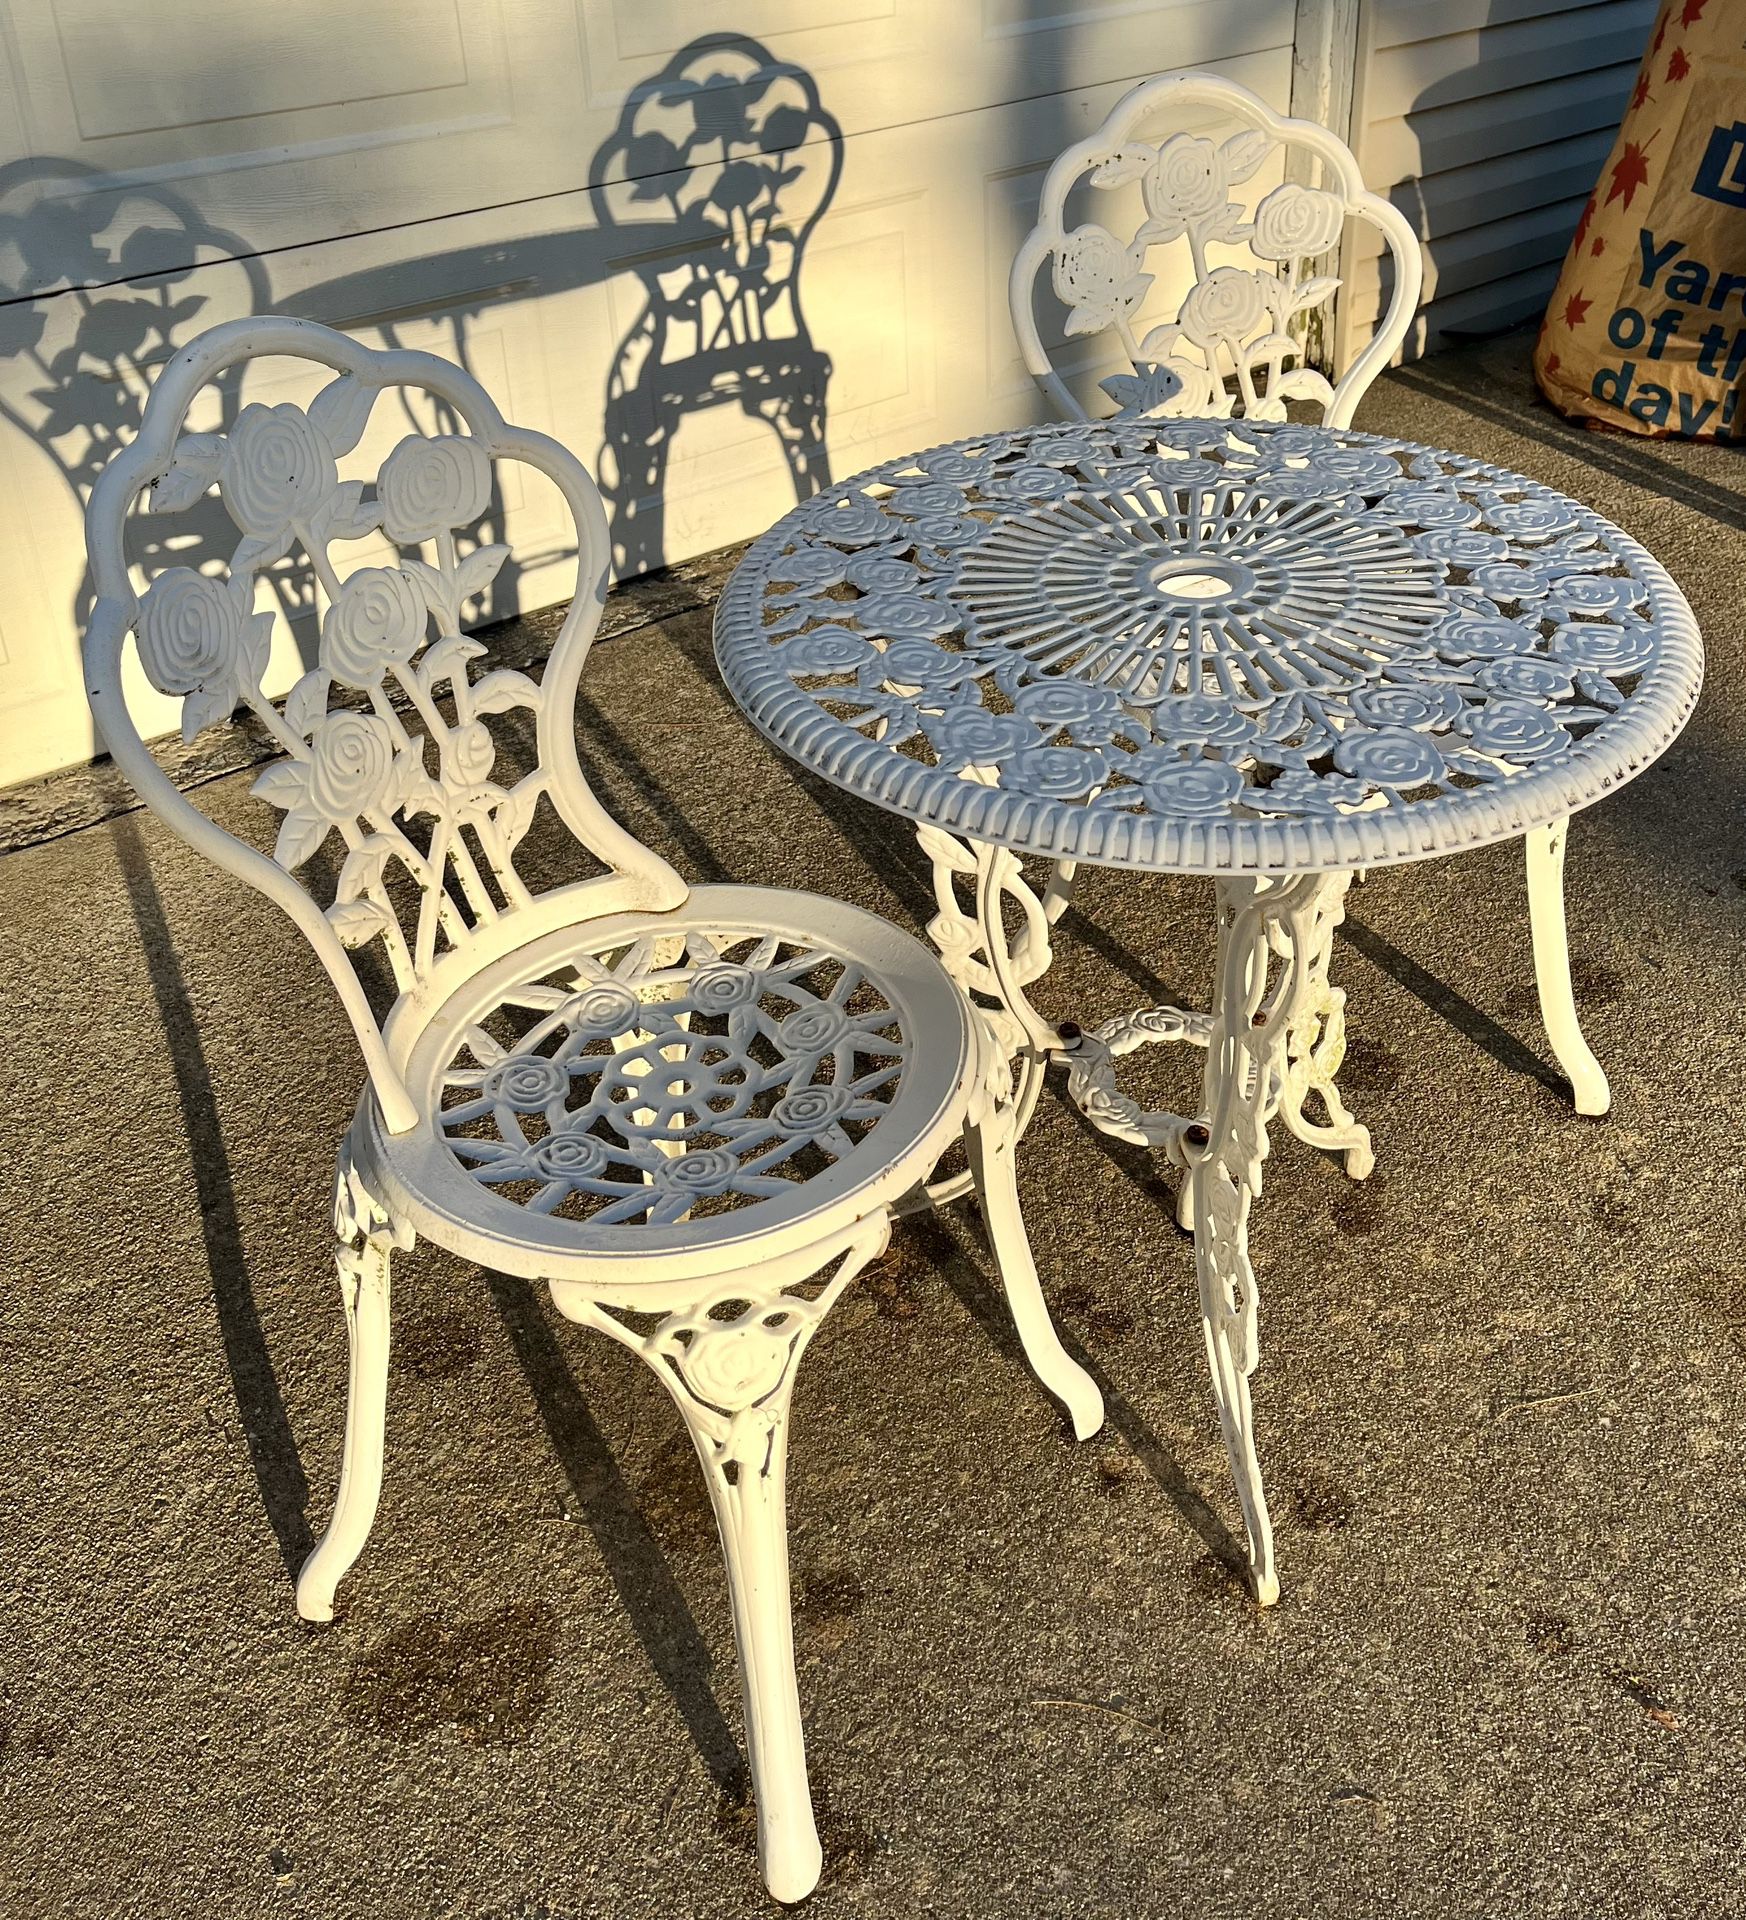 Outdoor FURNITURE | Cast Iron Patio / Garden Table and Chairs. I cannot deliver you would need to arrange your own transport.